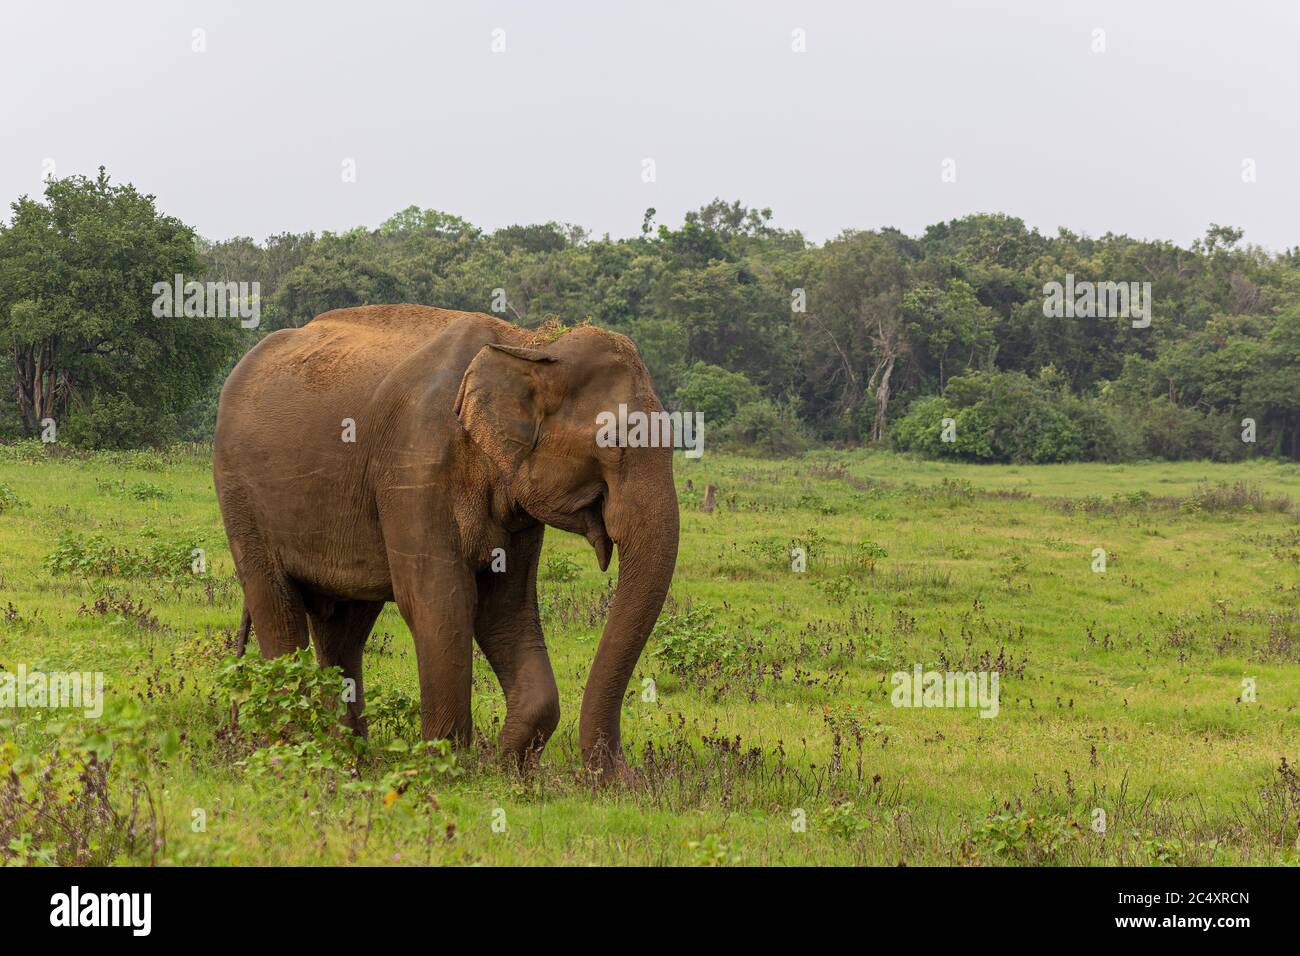 Elephant on a green field relaxing. Concept of animal care, travel and wildlife observation. Stock Photo